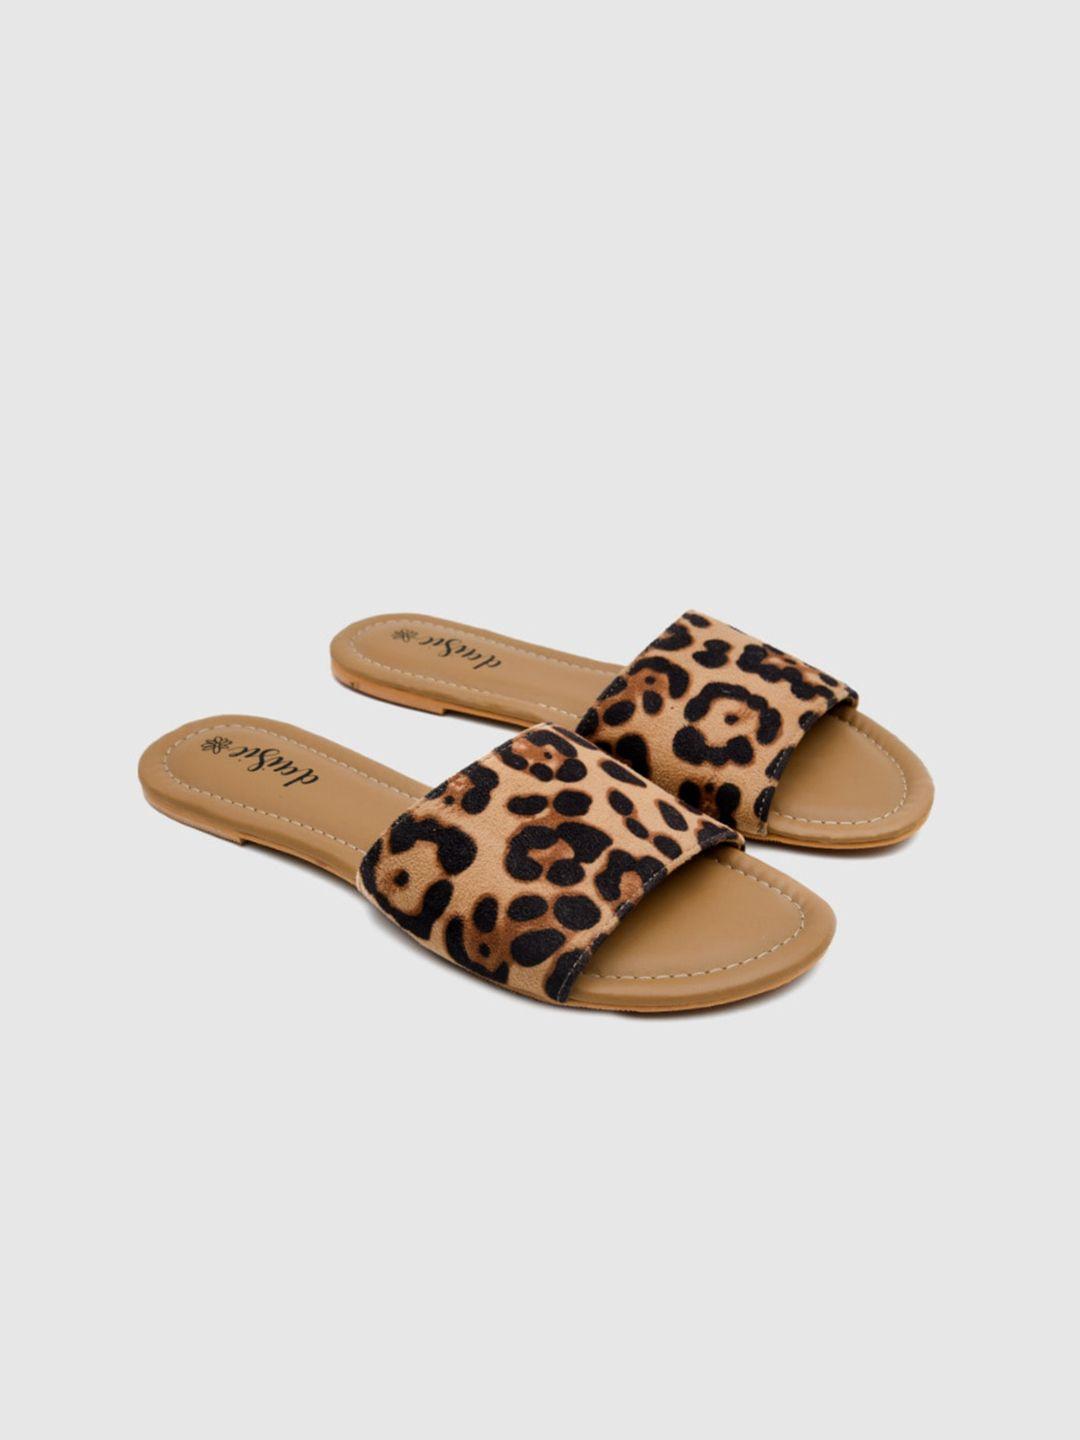 daisie women camel brown printed open toe flats with bows